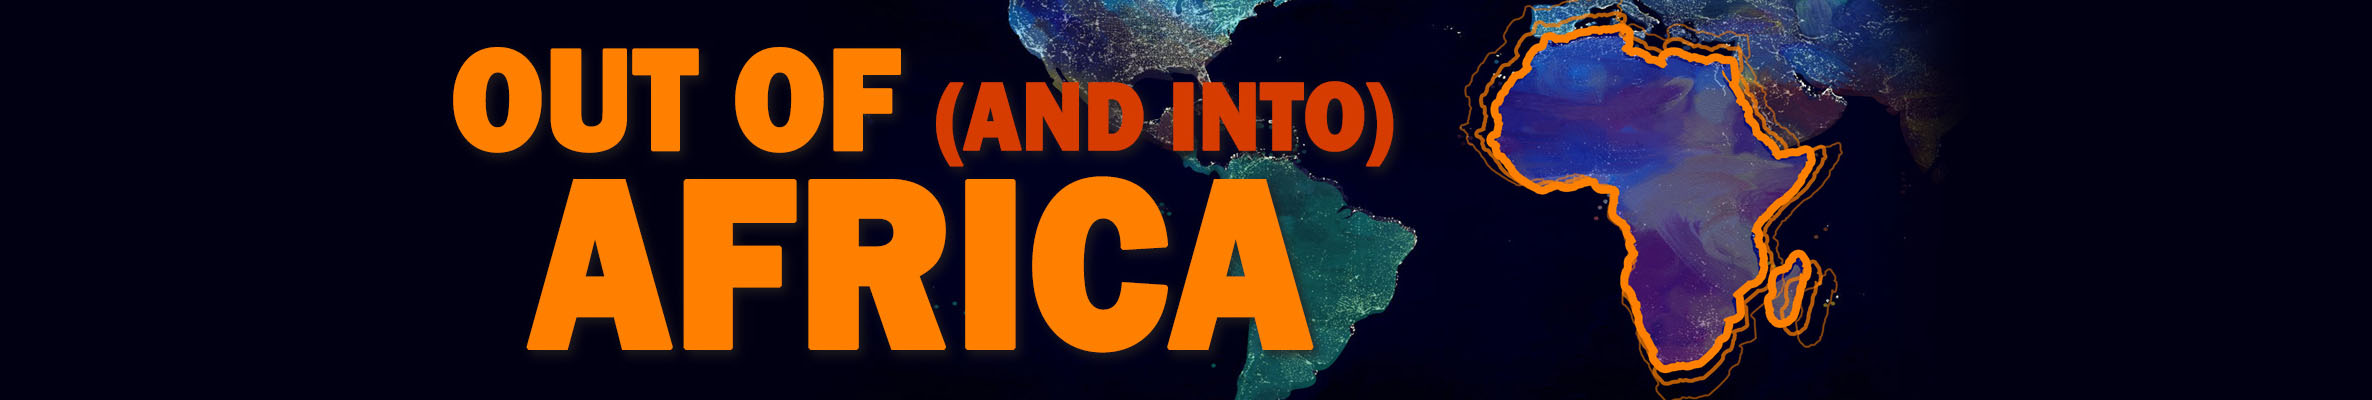 Out of and Into Africa Conference banner